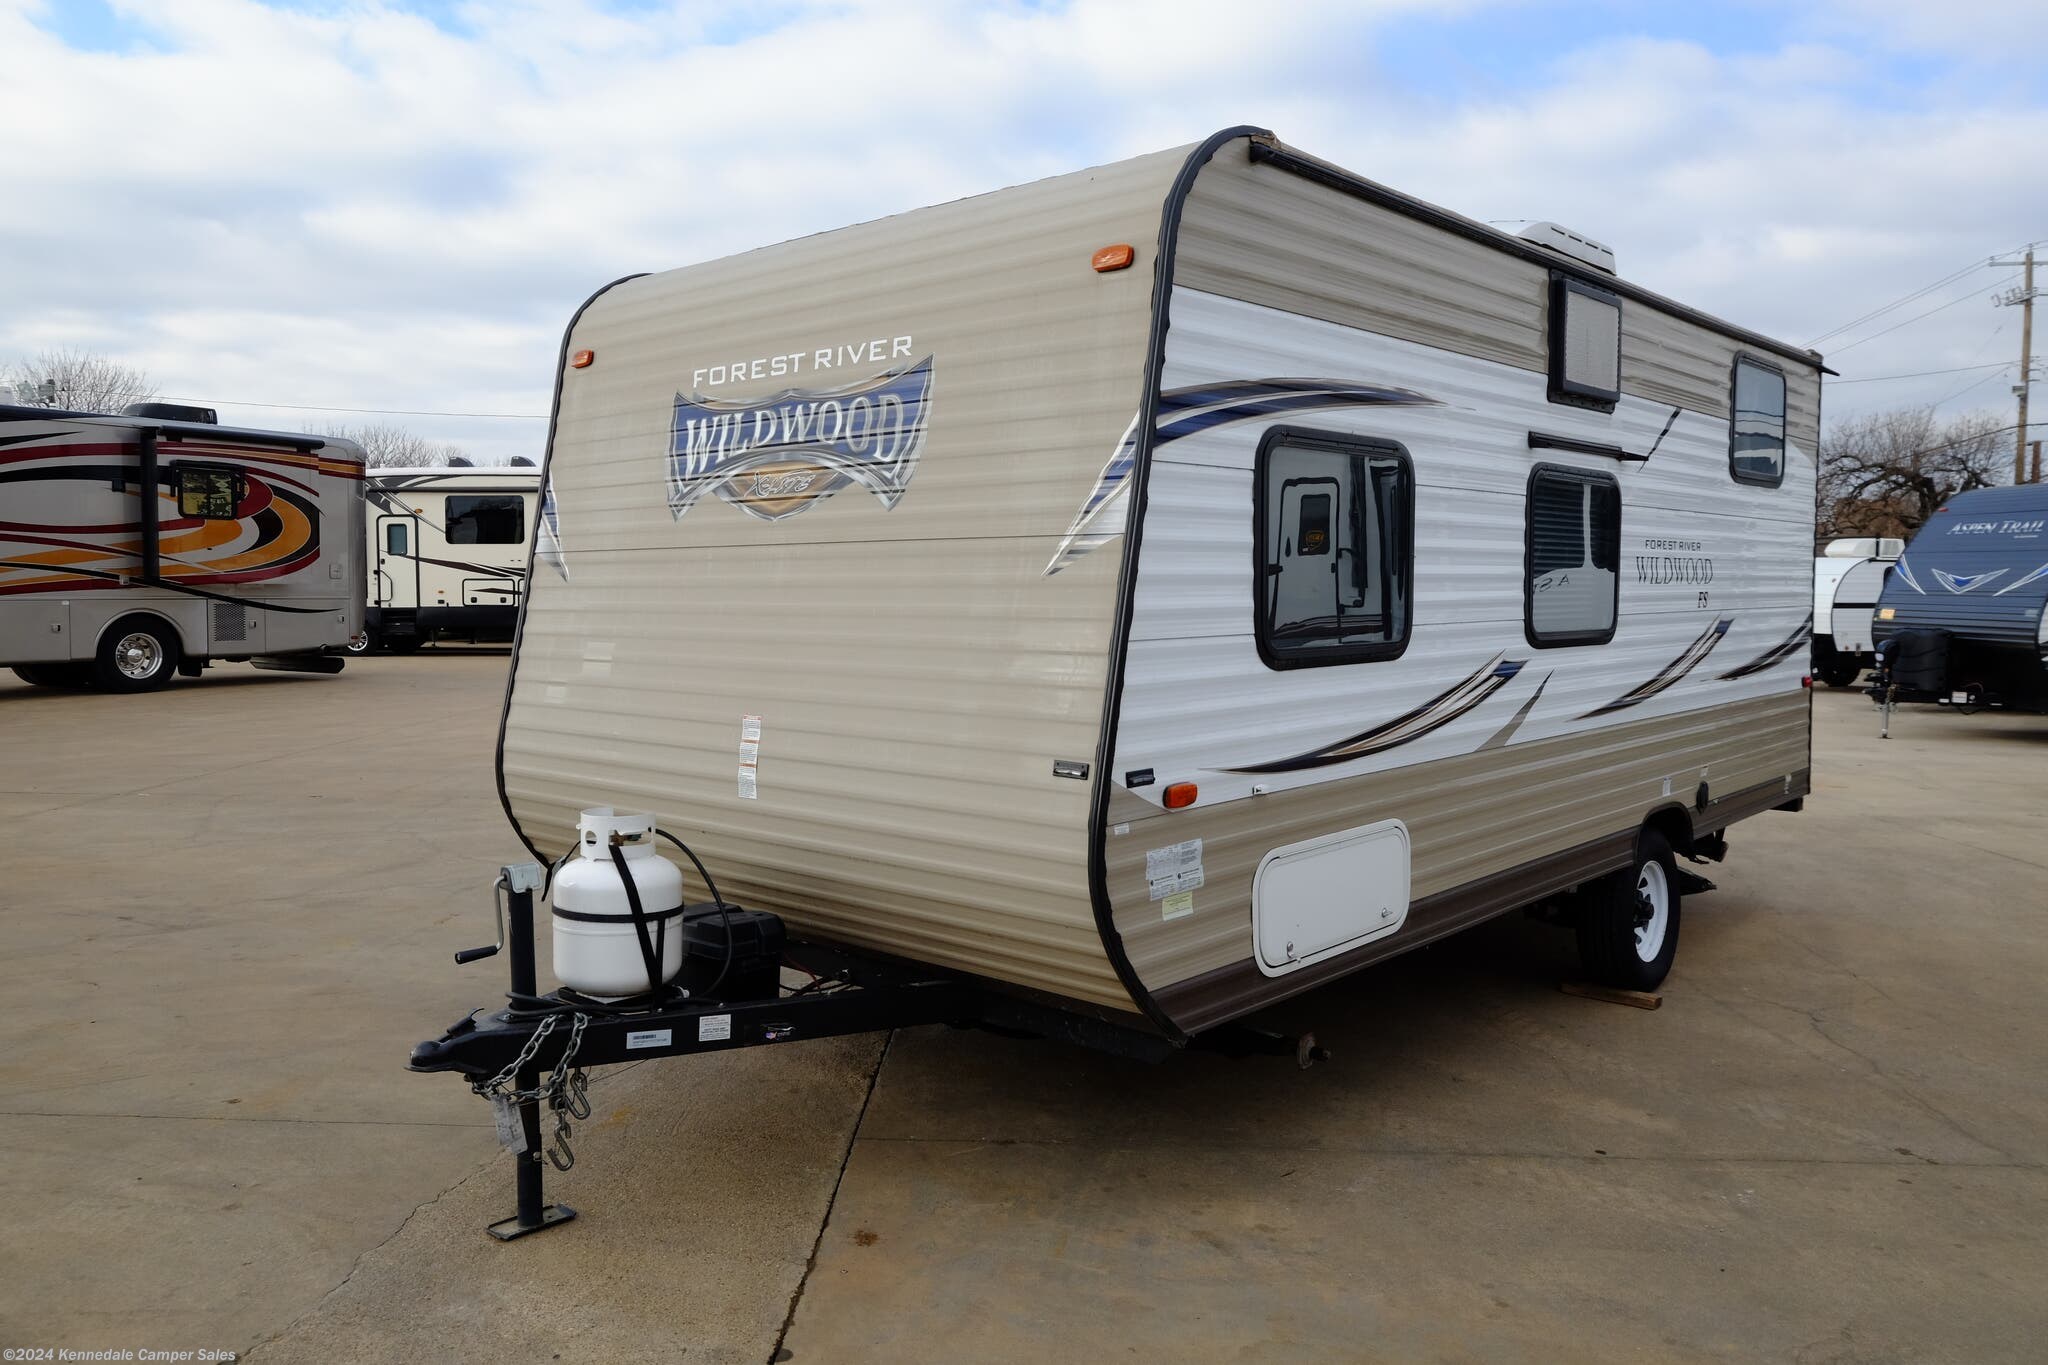 2016 Forest River Wildwood X-Lite FSX 195BH RV for Sale in Kennedale, TX 76060 | 351648 | RVUSA 2016 Forest River Wildwood X Lite 195bh